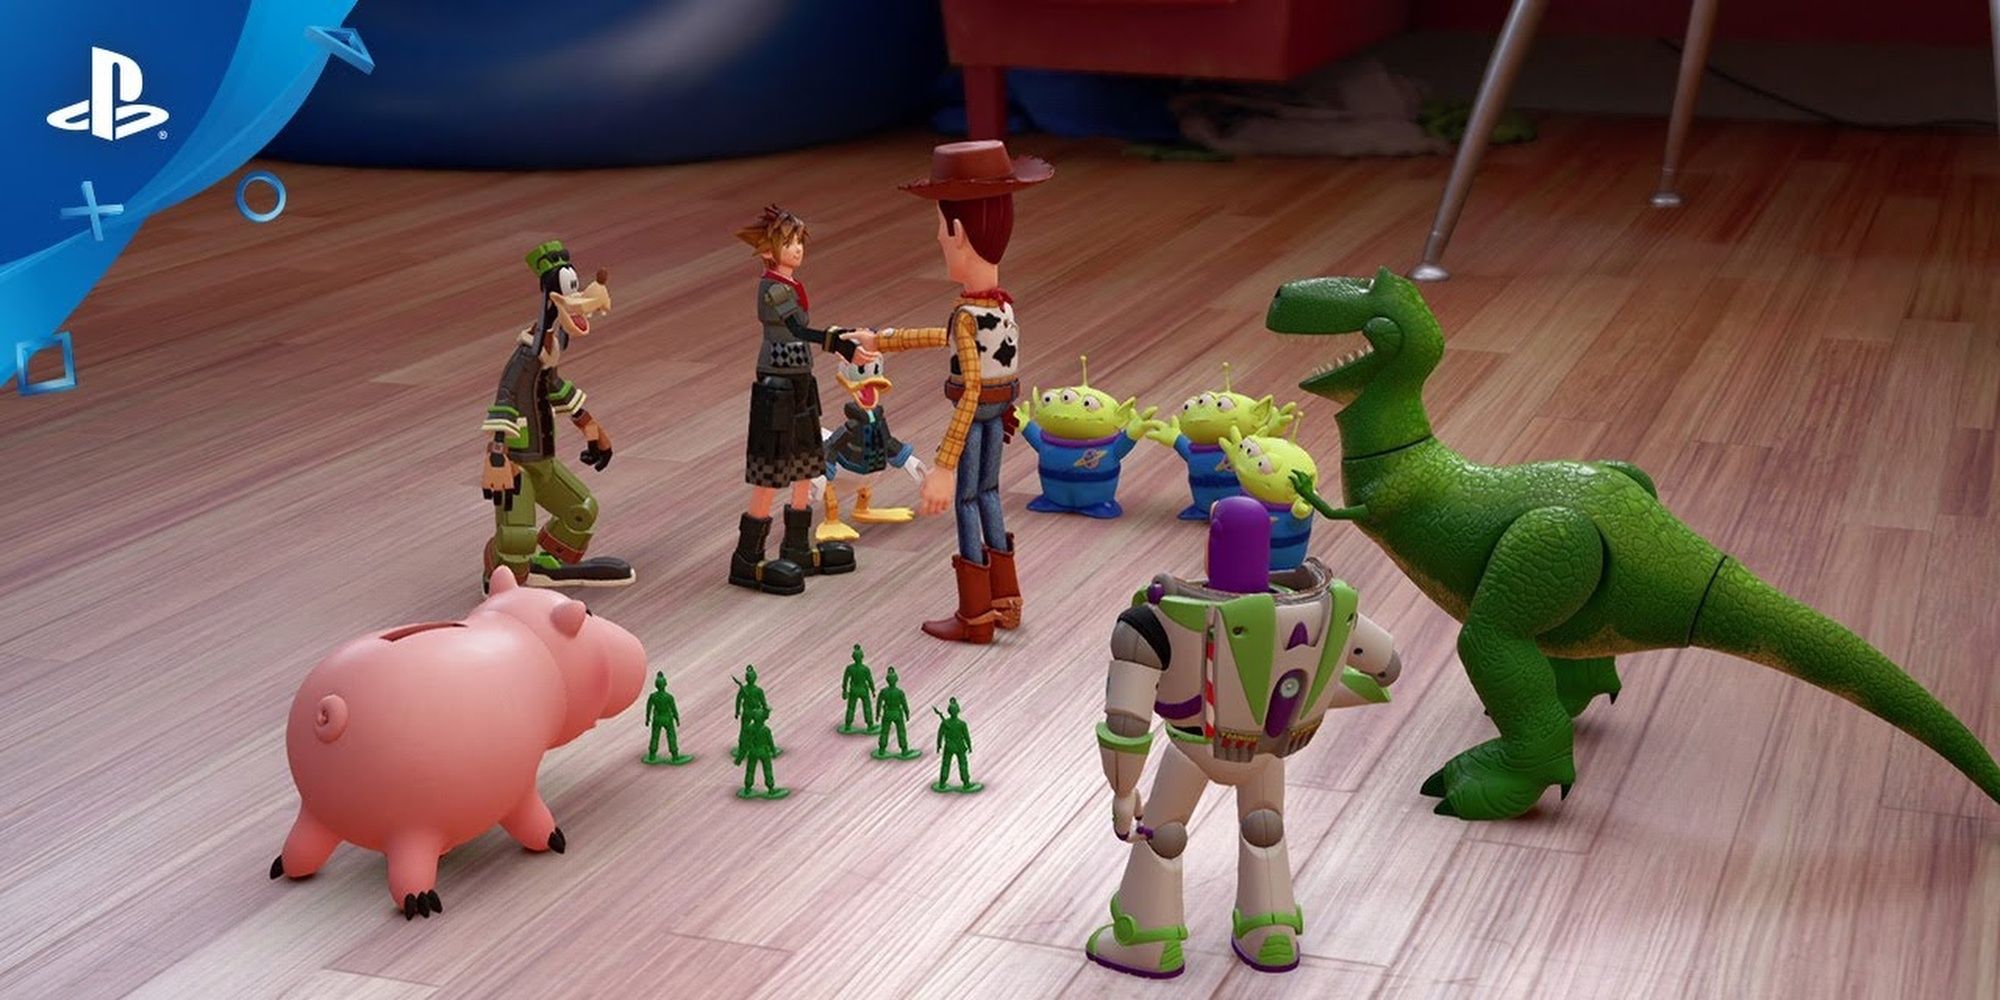 Sora, Donald, Goofy, Woody, Buzz Lightyear, Rex, Hamm, Sarge and the Bucket O Soldiers and the Aliens in Kingdom Hearts 3